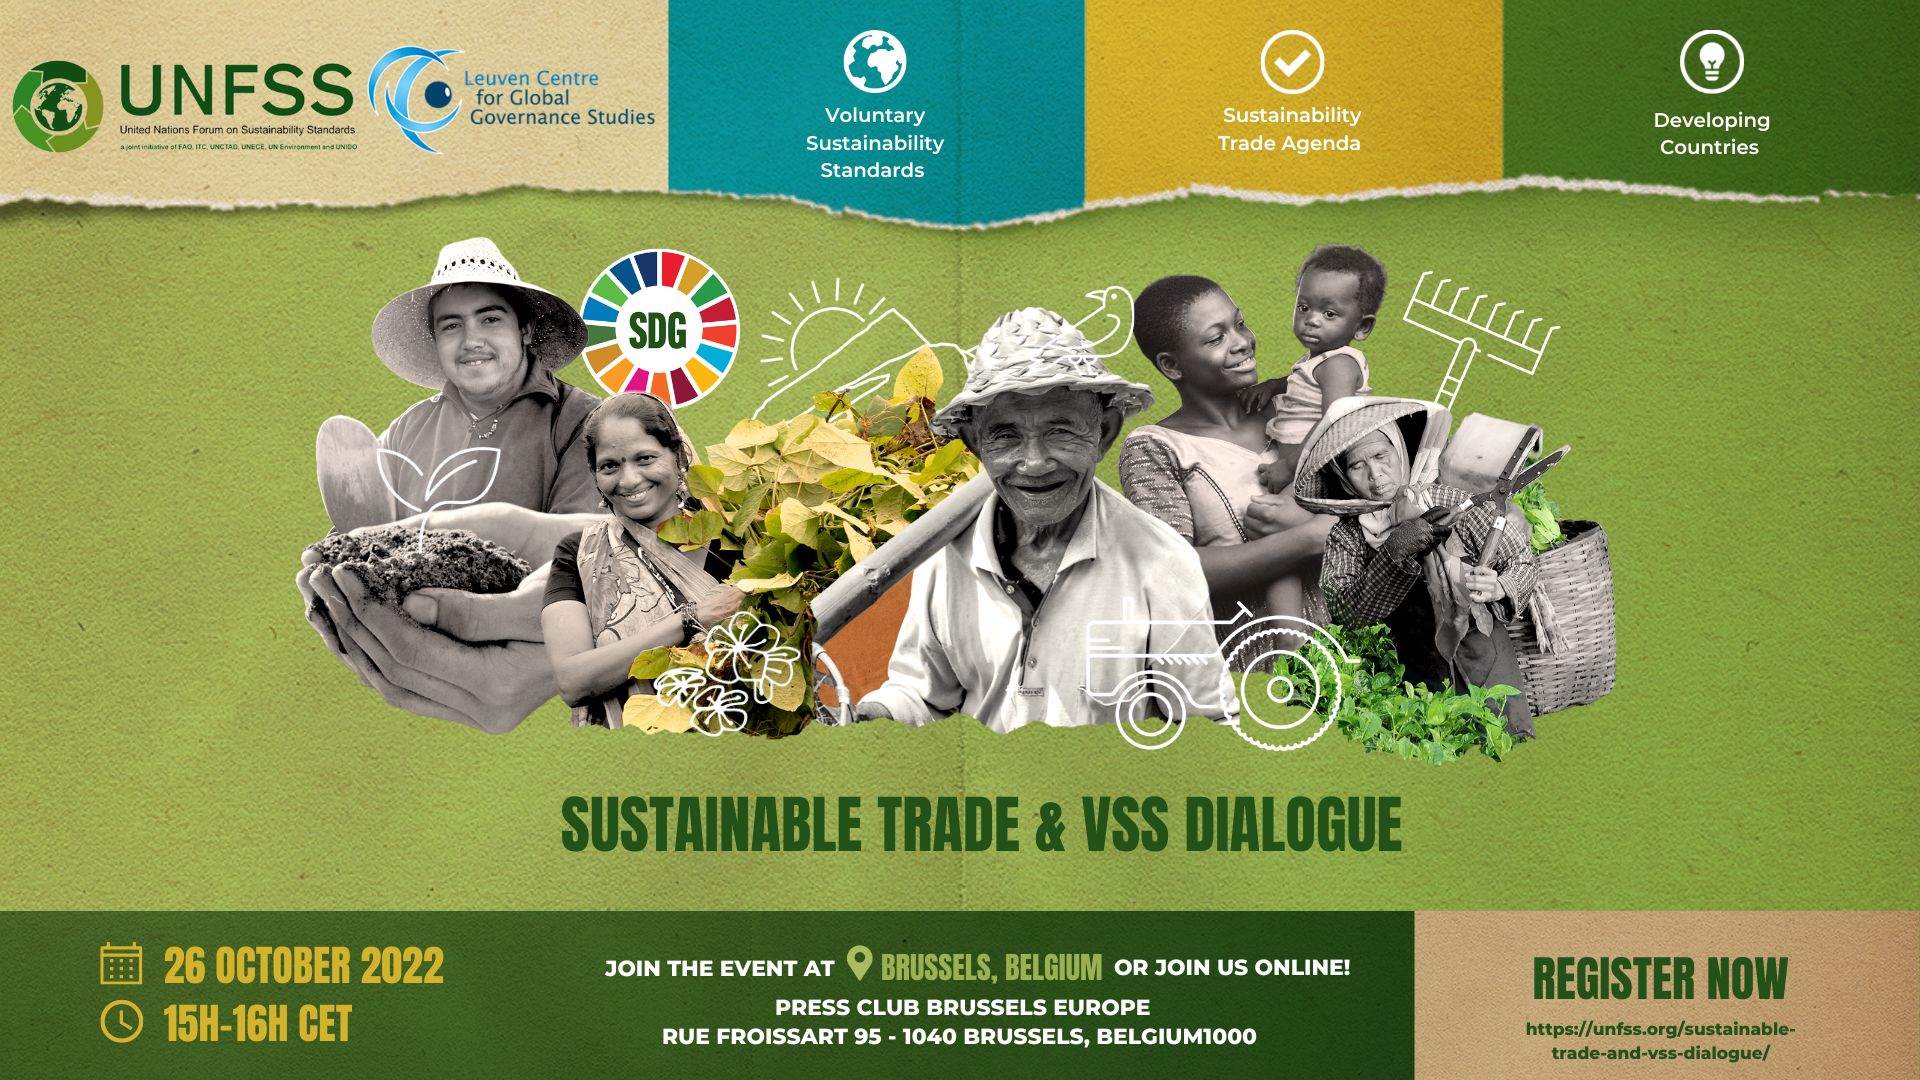 Voluntary Sustainability Standards Dialogue on Sustainable Trade and Development Opportunities 